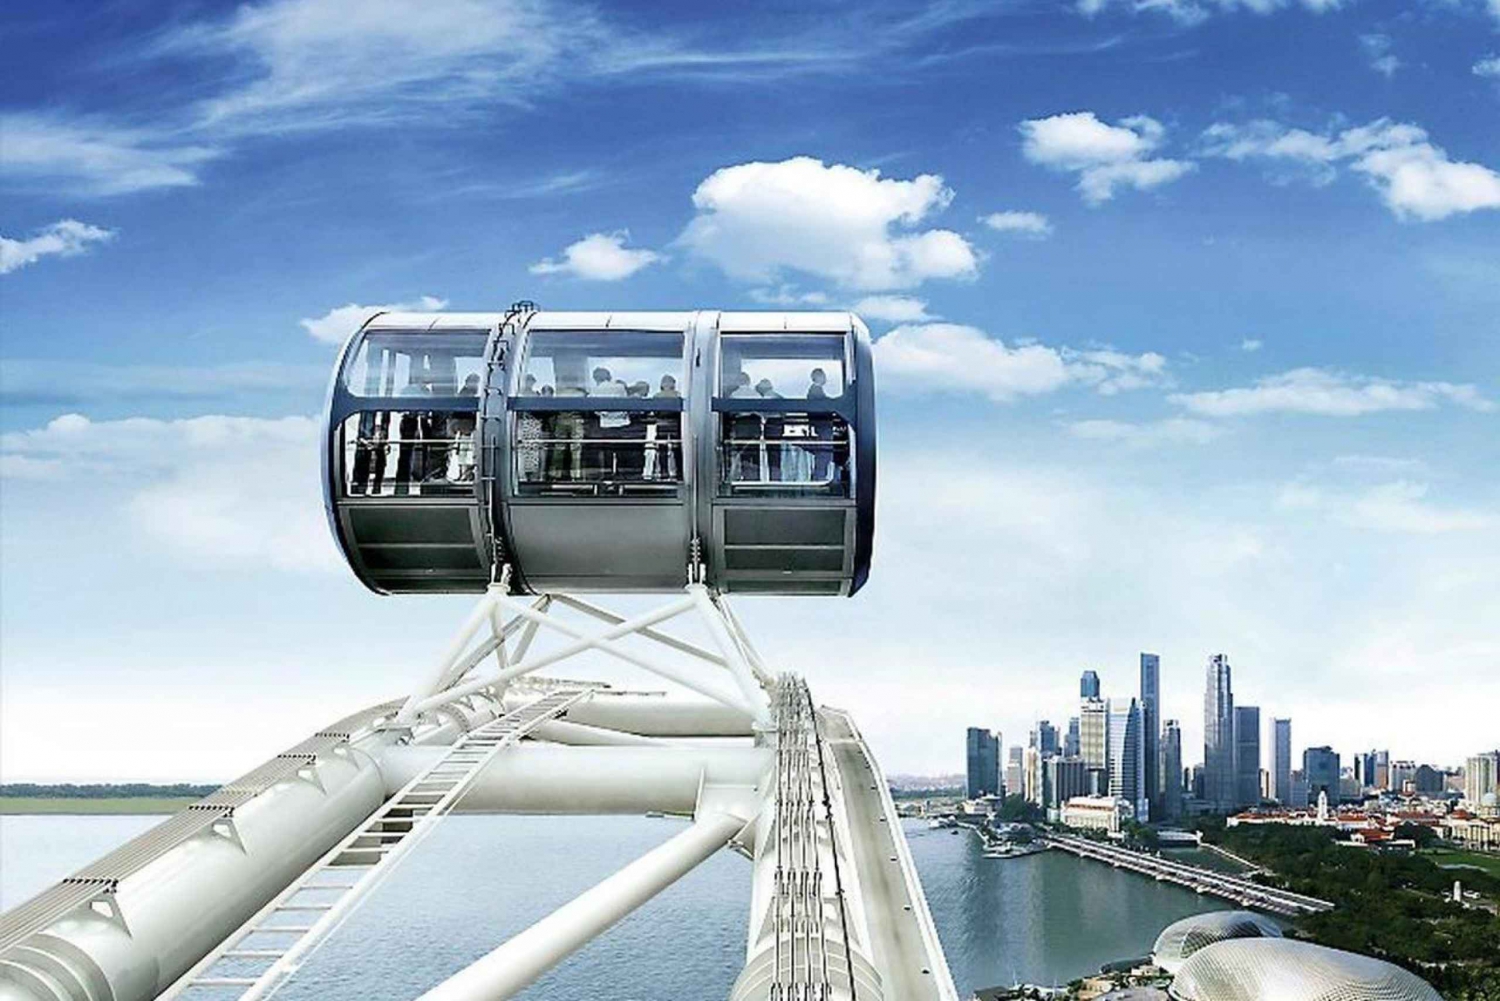 Singapore: Flyer & Gardens by the Bay Ticket Bundle